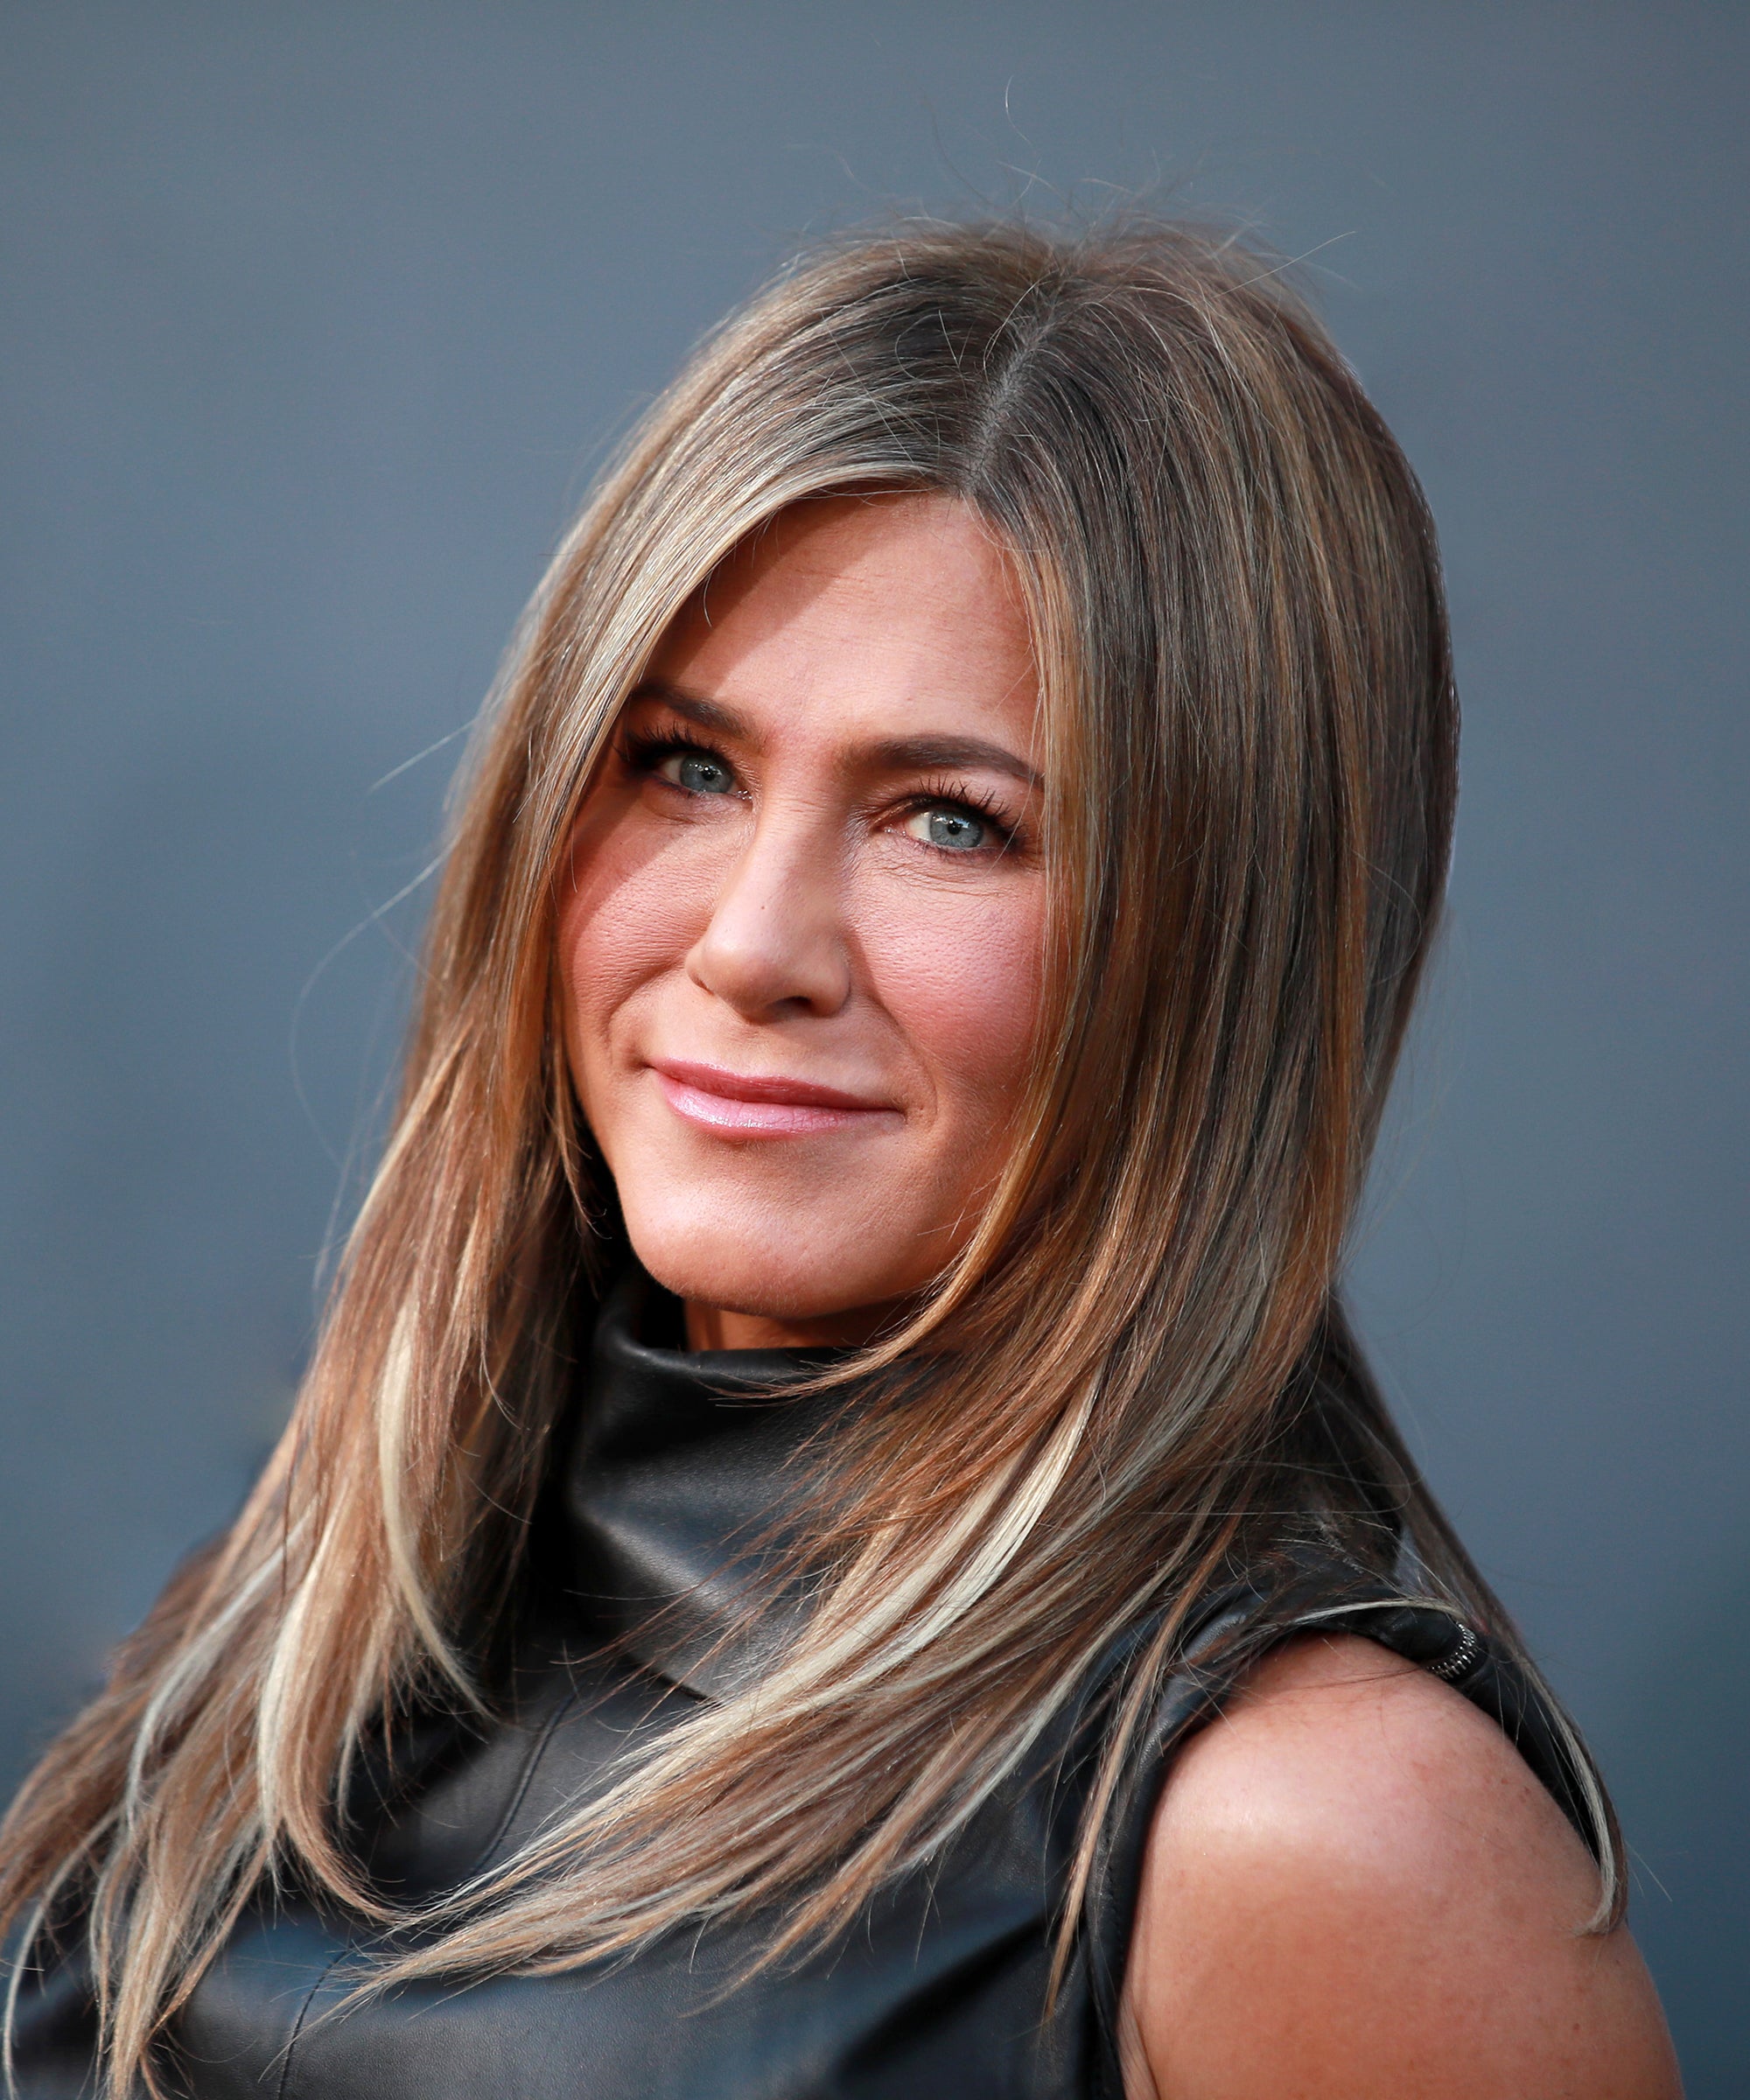 Jennifer Aniston Wore a Big 2021 Bag Trend for her Return to Instagram